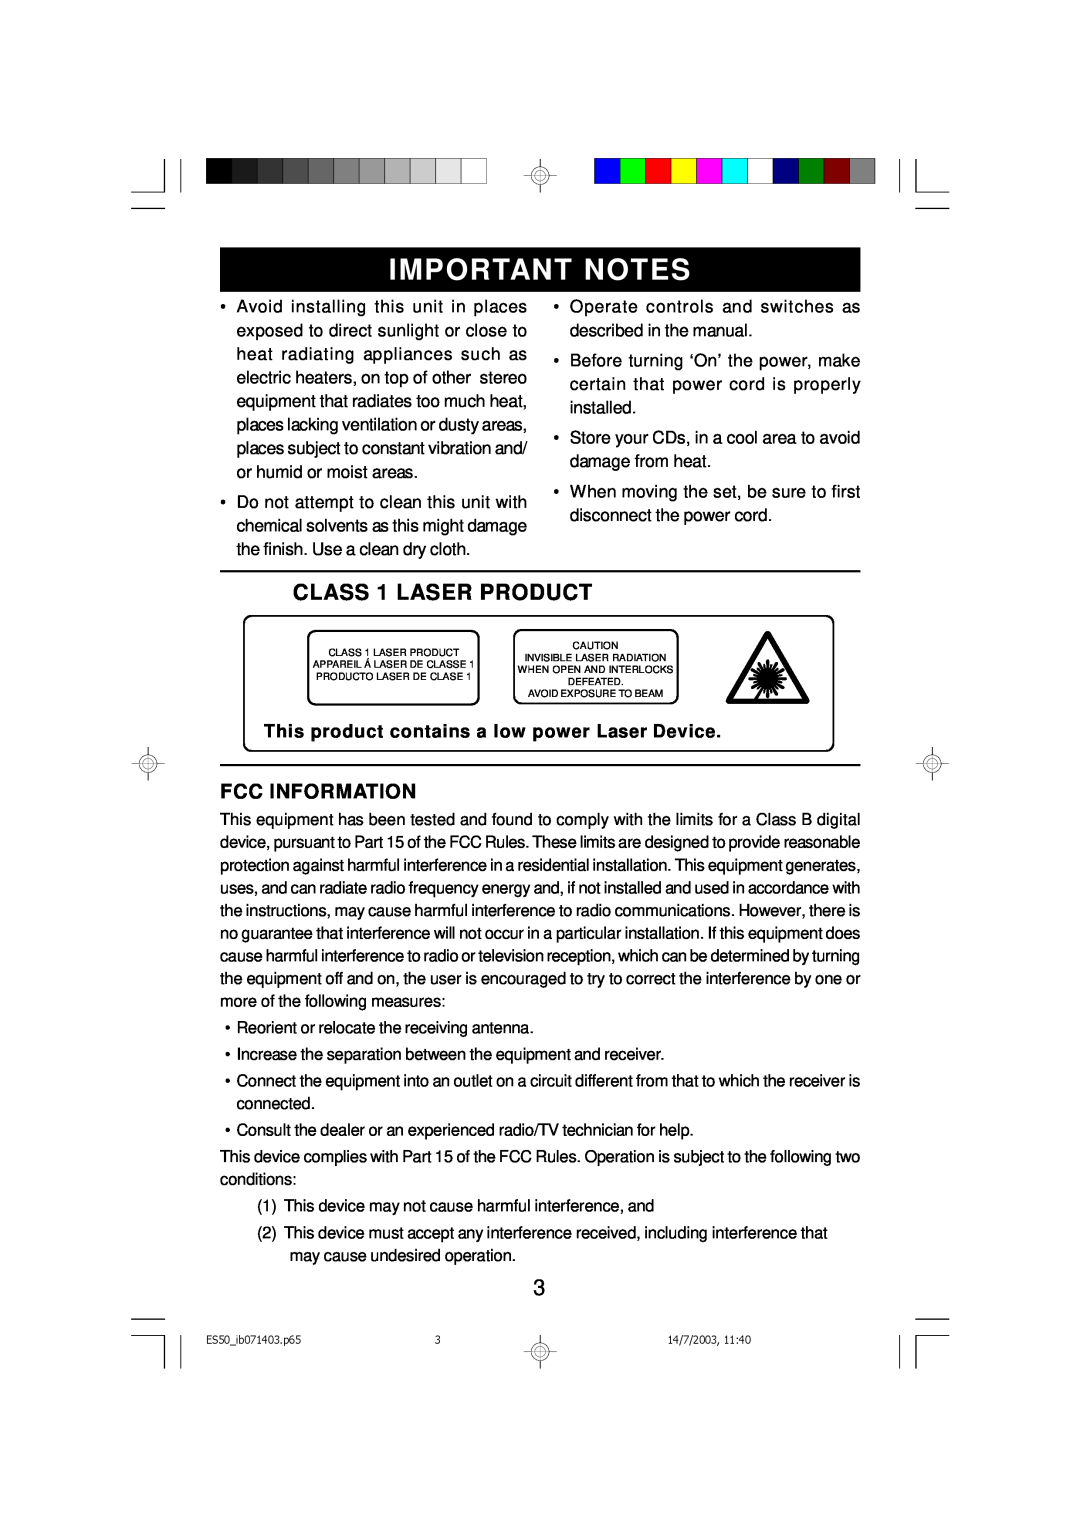 Emerson ES50 Important Notes, CLASS 1 LASER PRODUCT, Fcc Information, This product contains a low power Laser Device 